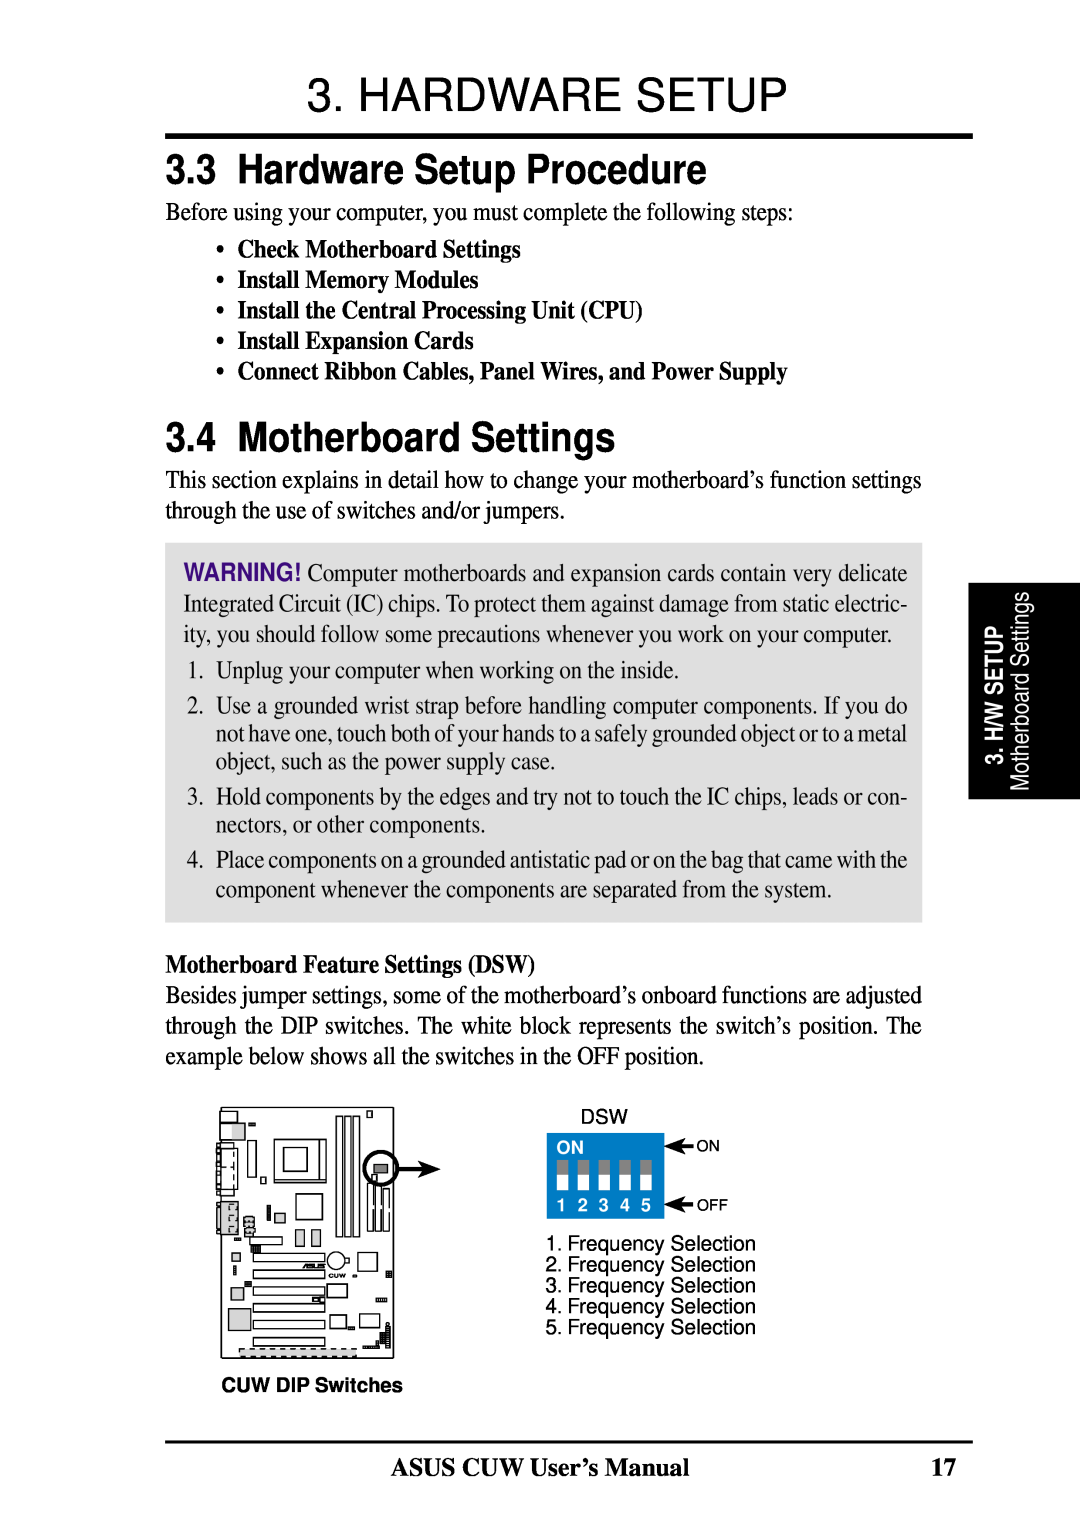 Asus 810 Hardware Setup Procedure, Check Motherboard Settings Install Memory Modules, Motherboard Feature Settings DSW 